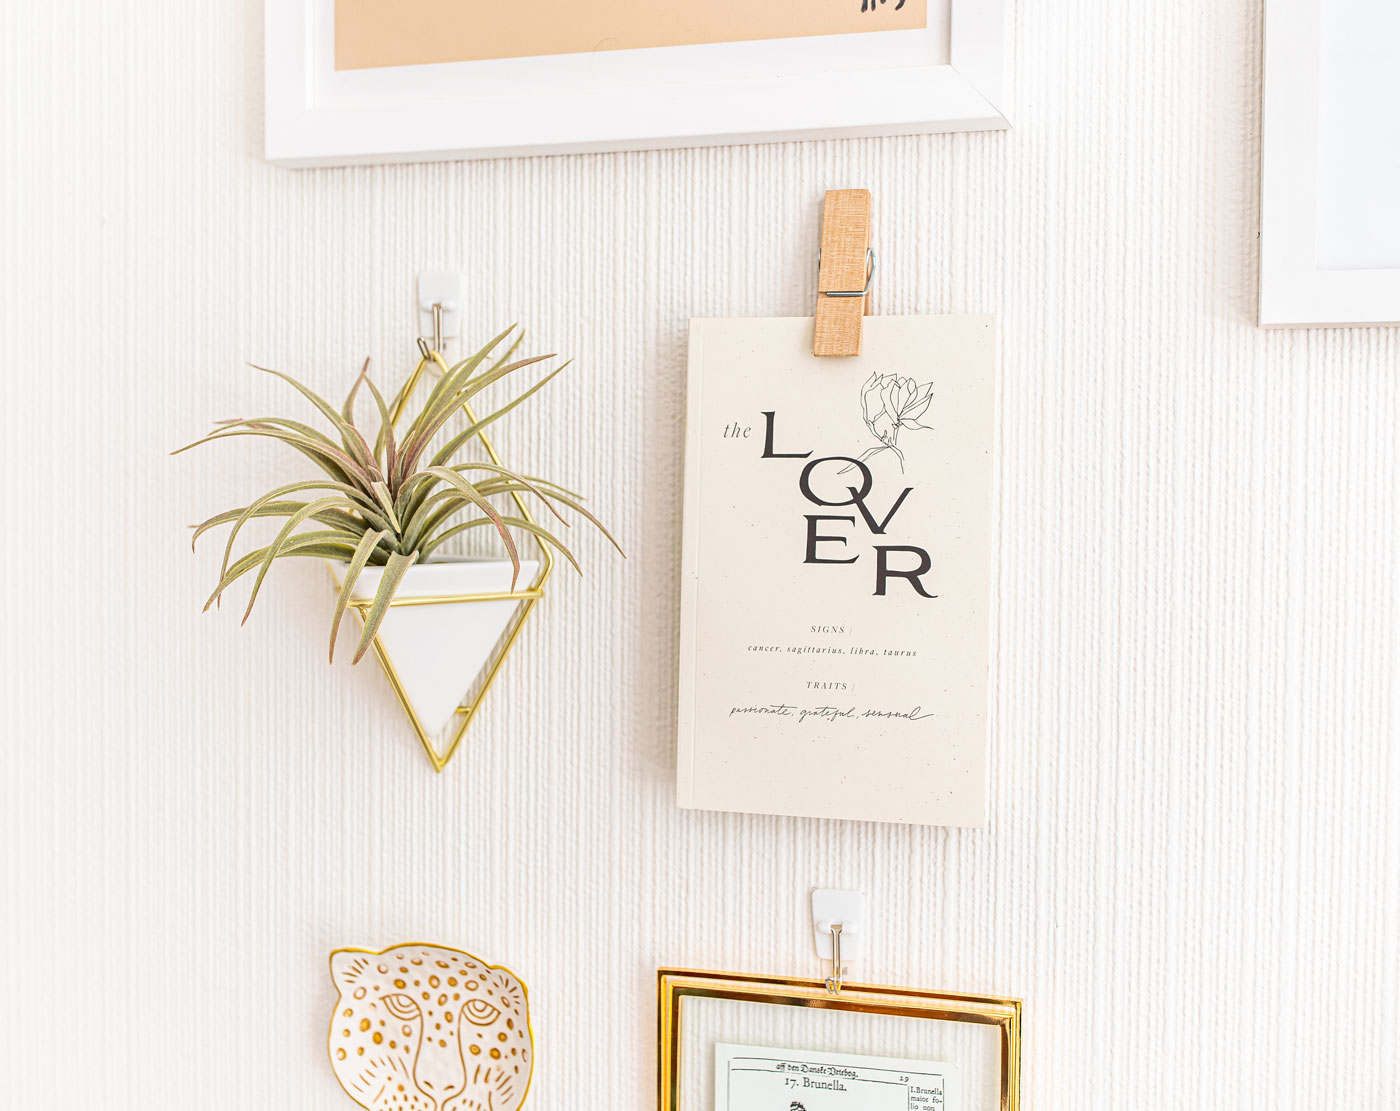 How to Create the Perfect Gallery Wall - Gallery Wall Tips – Photo Wall - Interior Decorating Tips – Kelsey Heinrichs - @kelseyinlondon - @homewithkelsey 